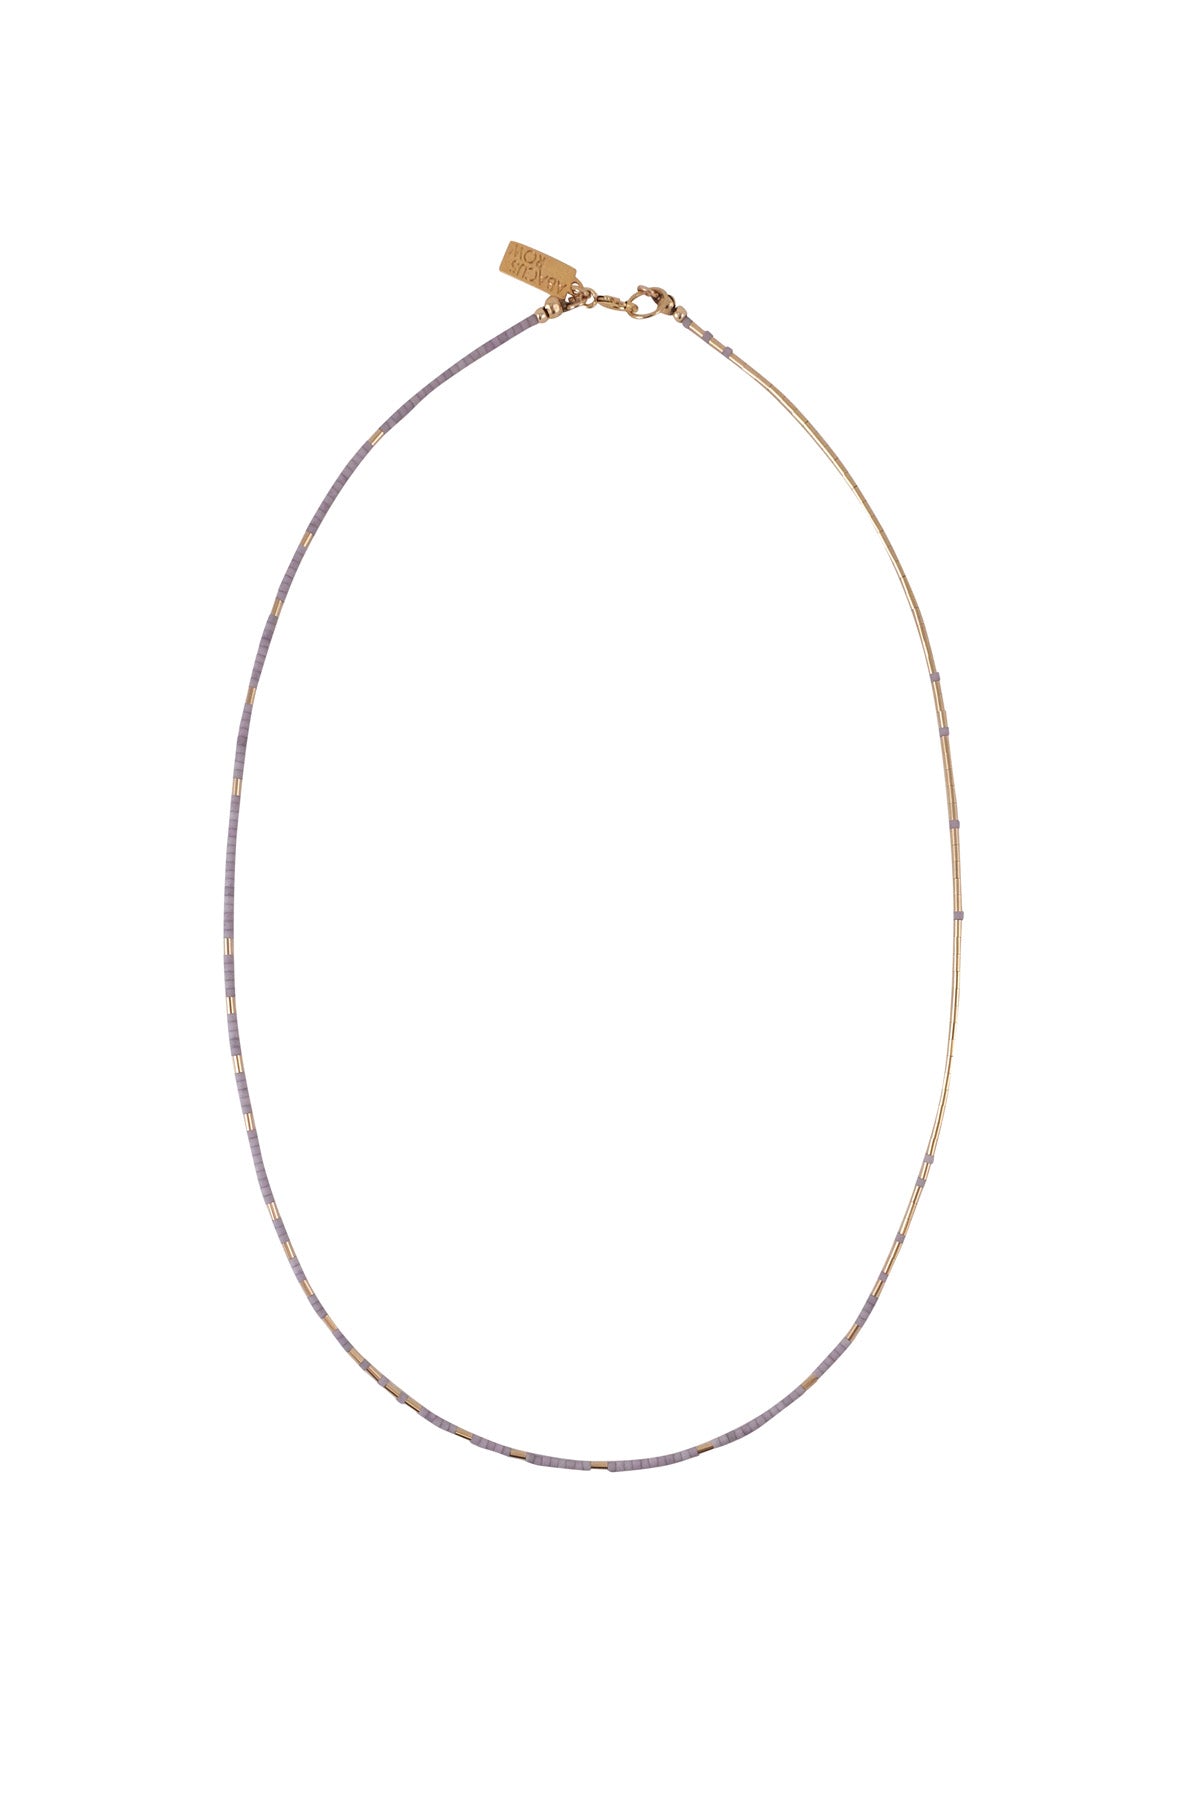 Abacus Row Arche Necklace